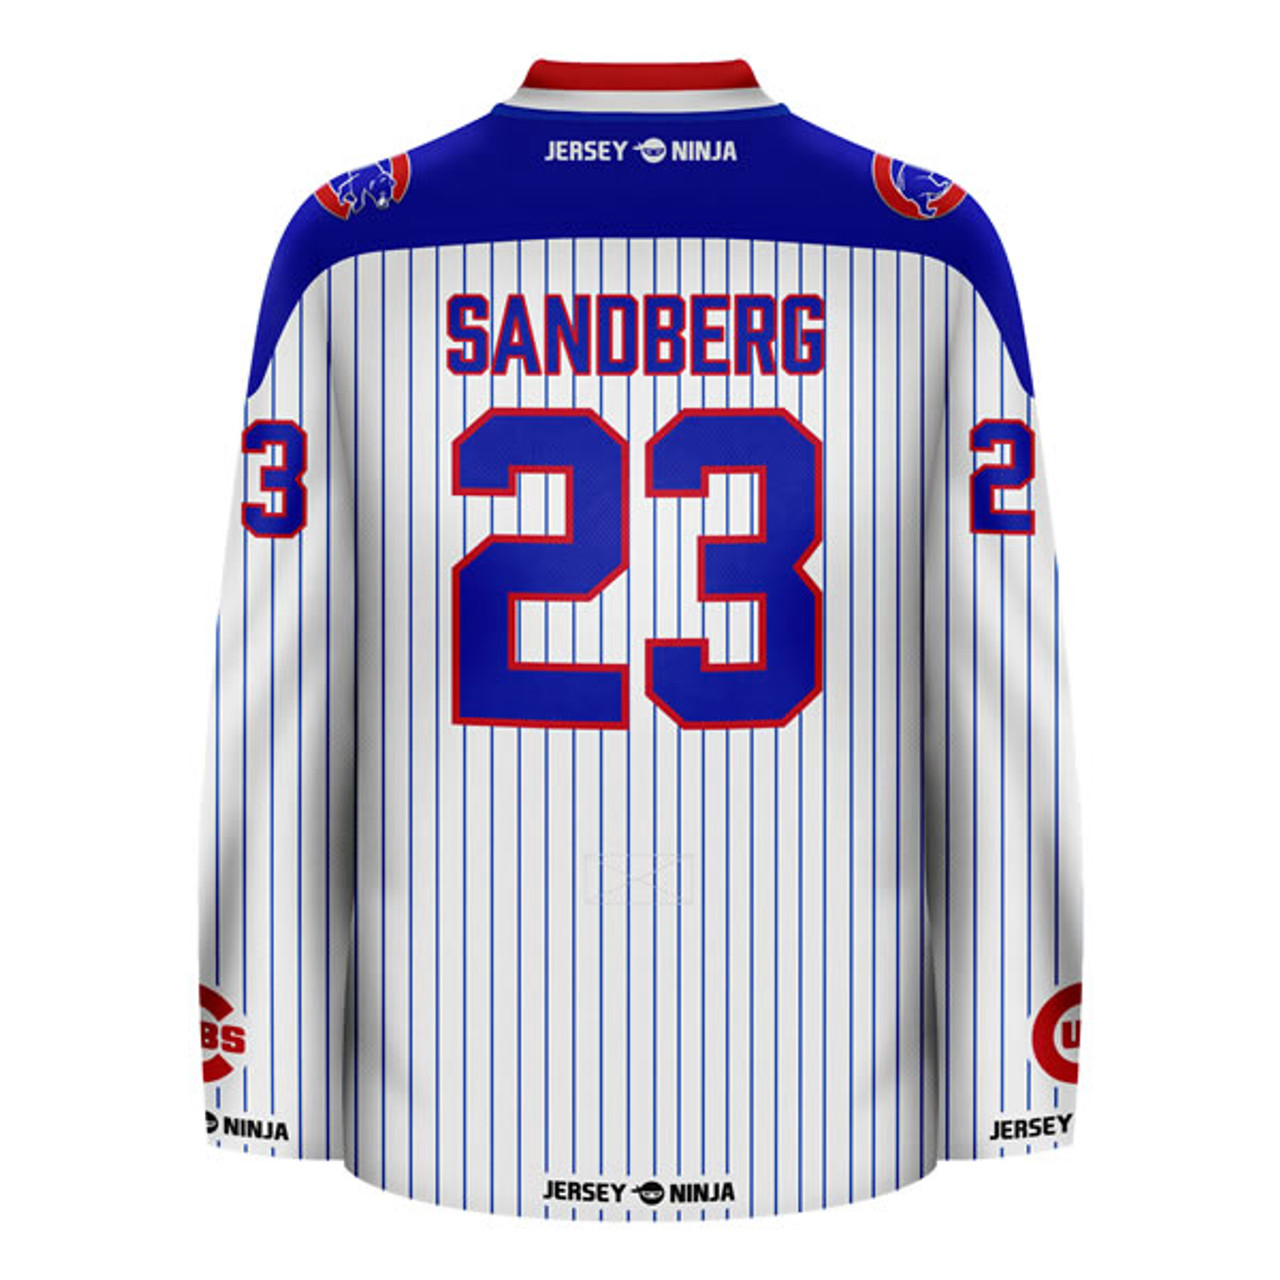 NHL MLB Replica Chicago Cubs Hockey Jersey. Customizable. Any name